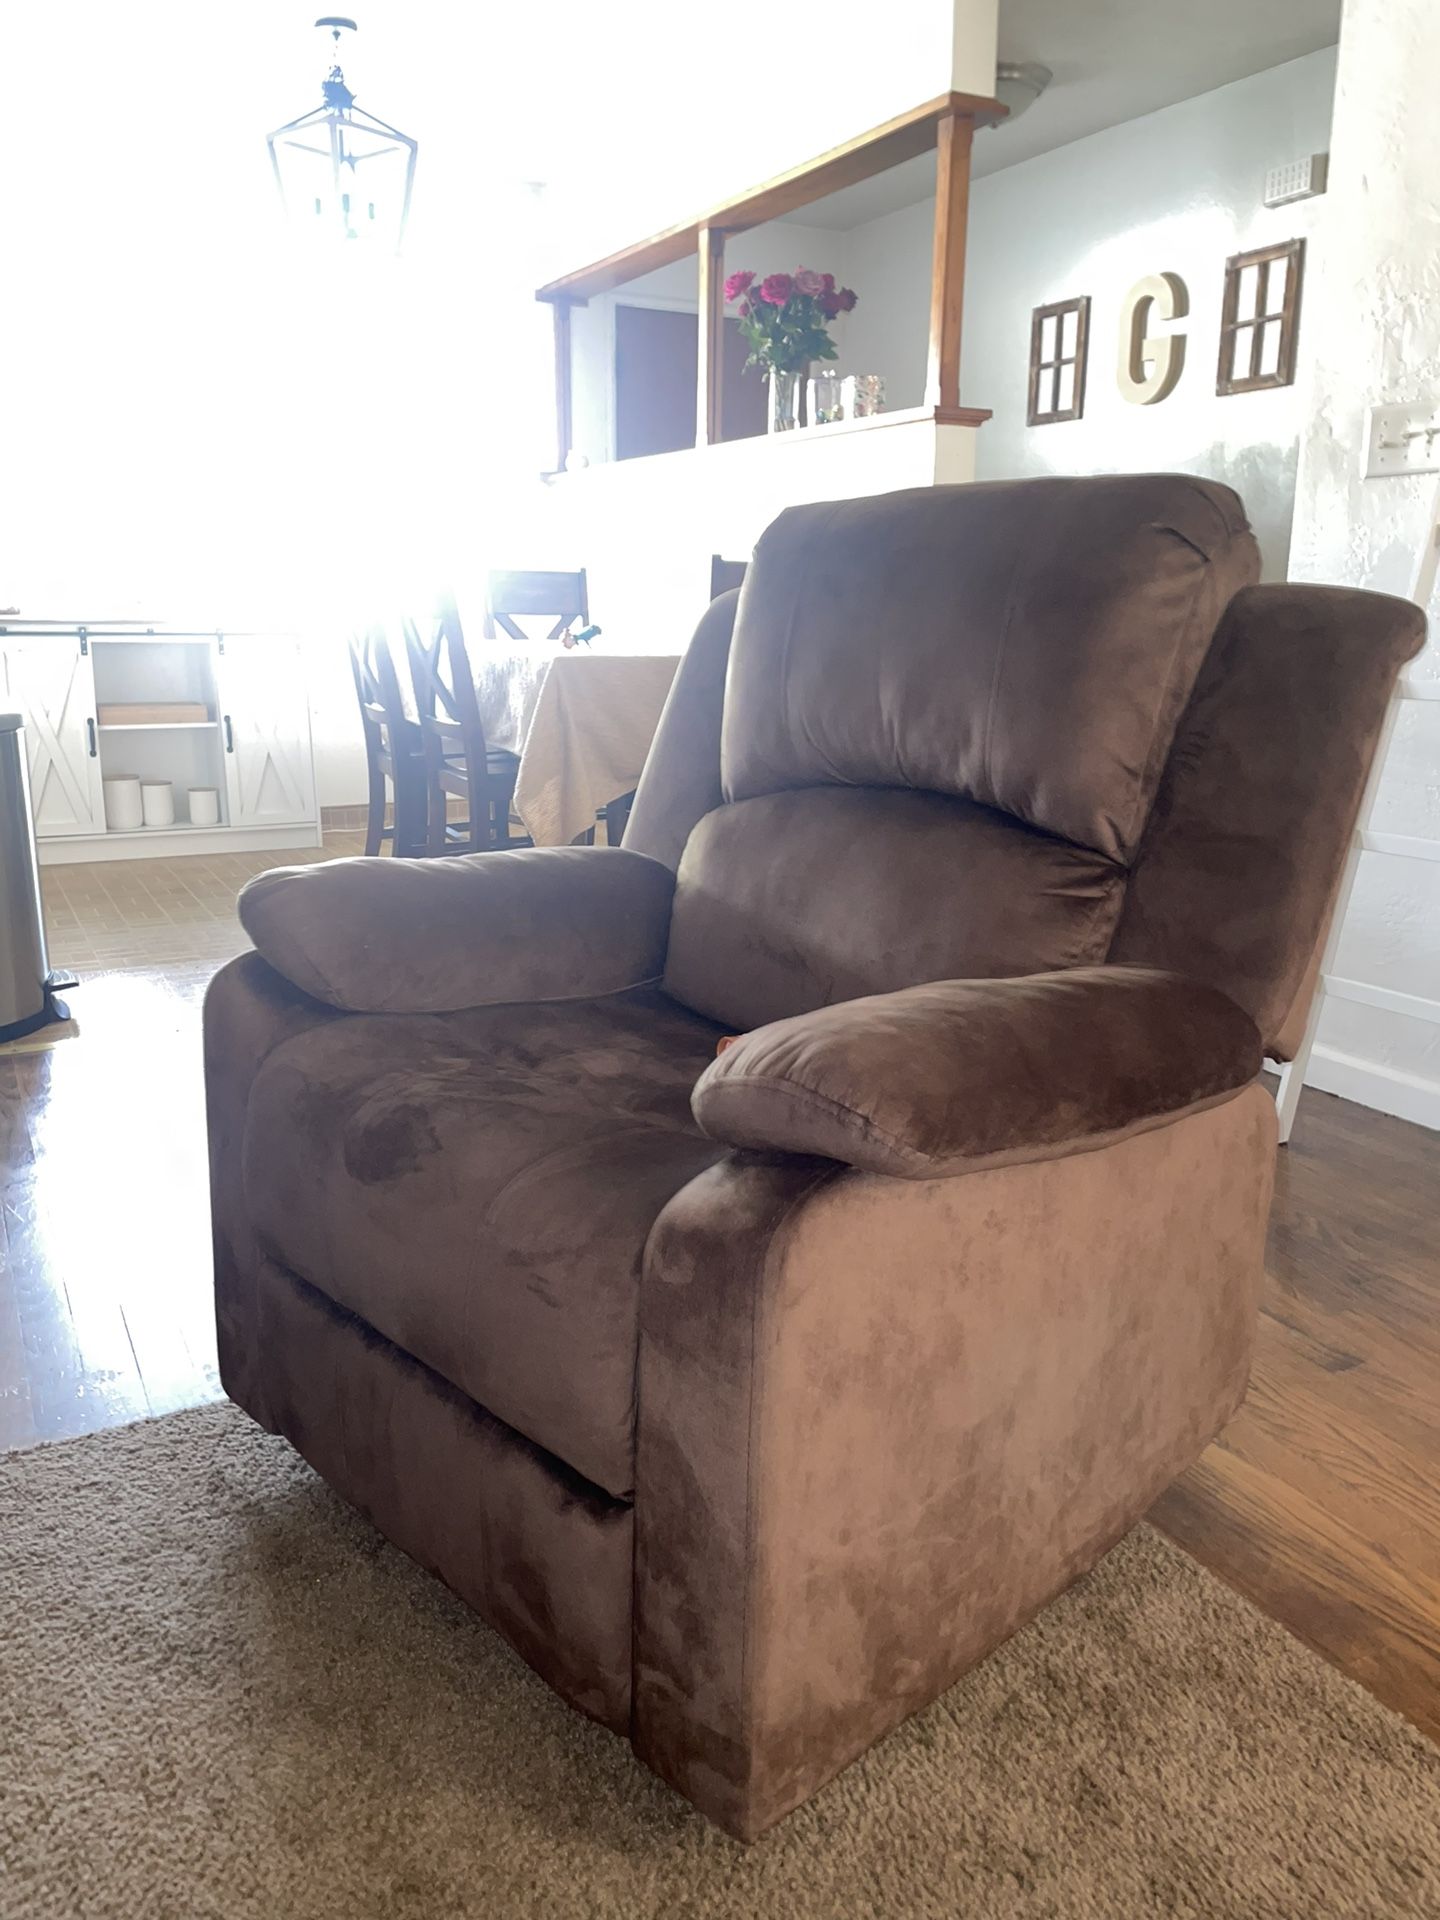 CANMOV Manual Recliner Chair